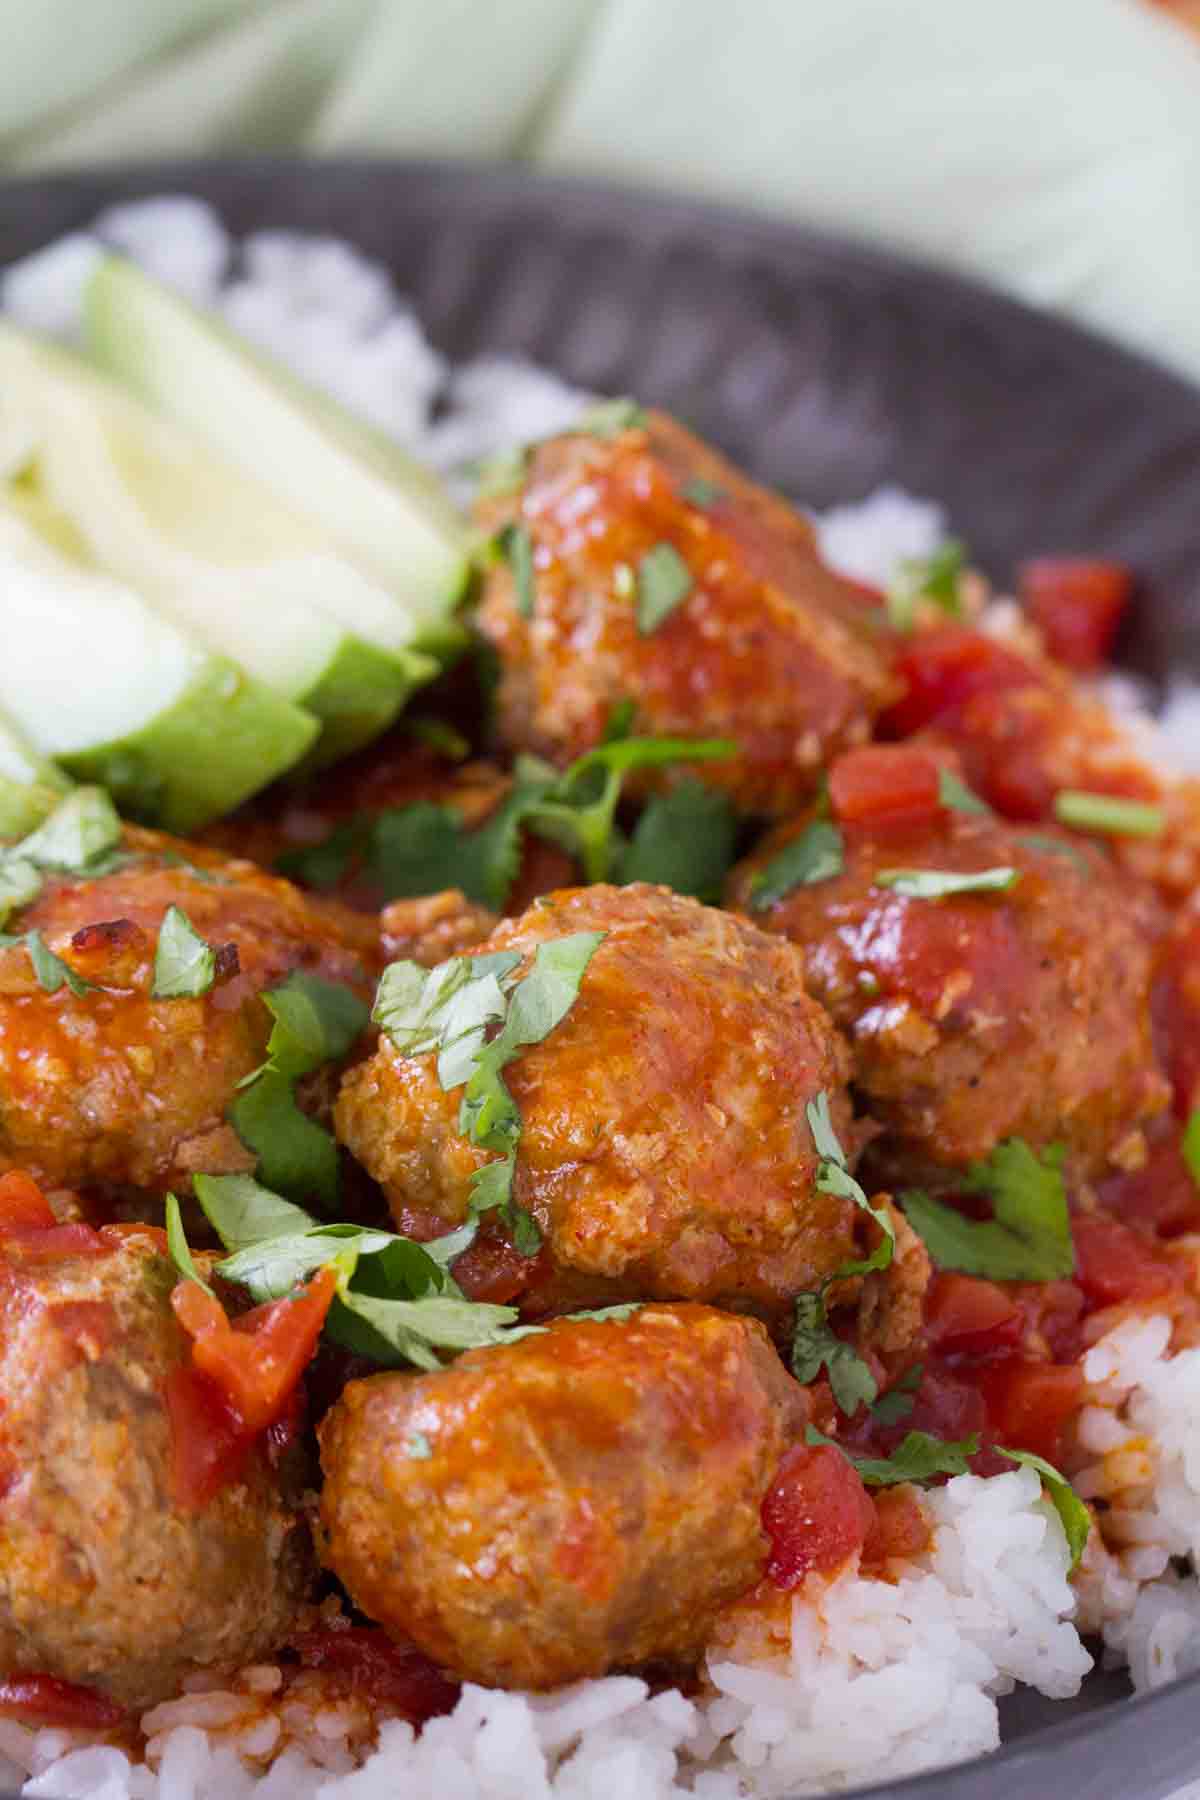 Slow cooker Mexican meatballs served over rice.